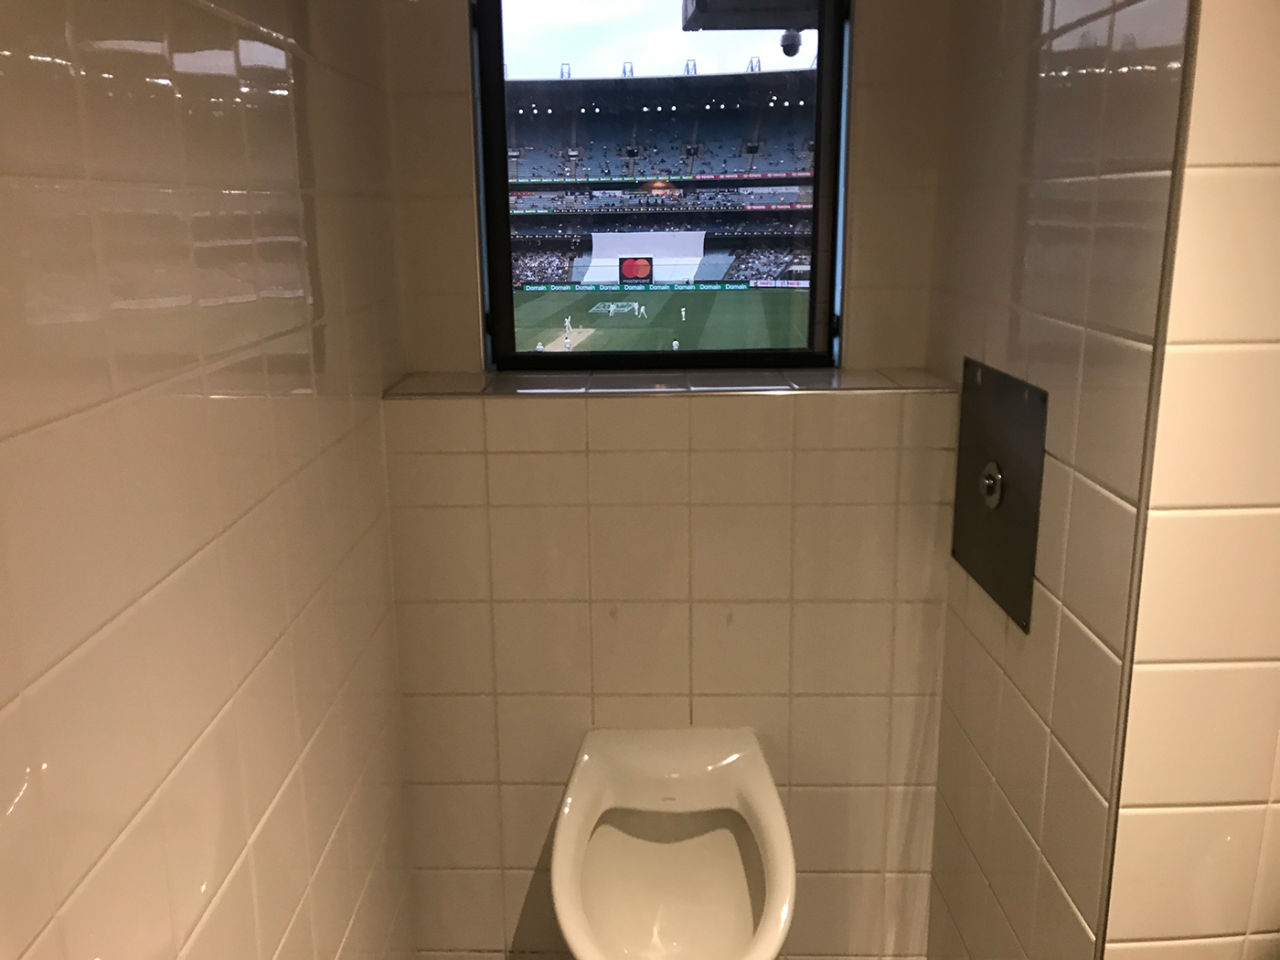 A view of play from a urinal in the members' section of the MCG, December 2018